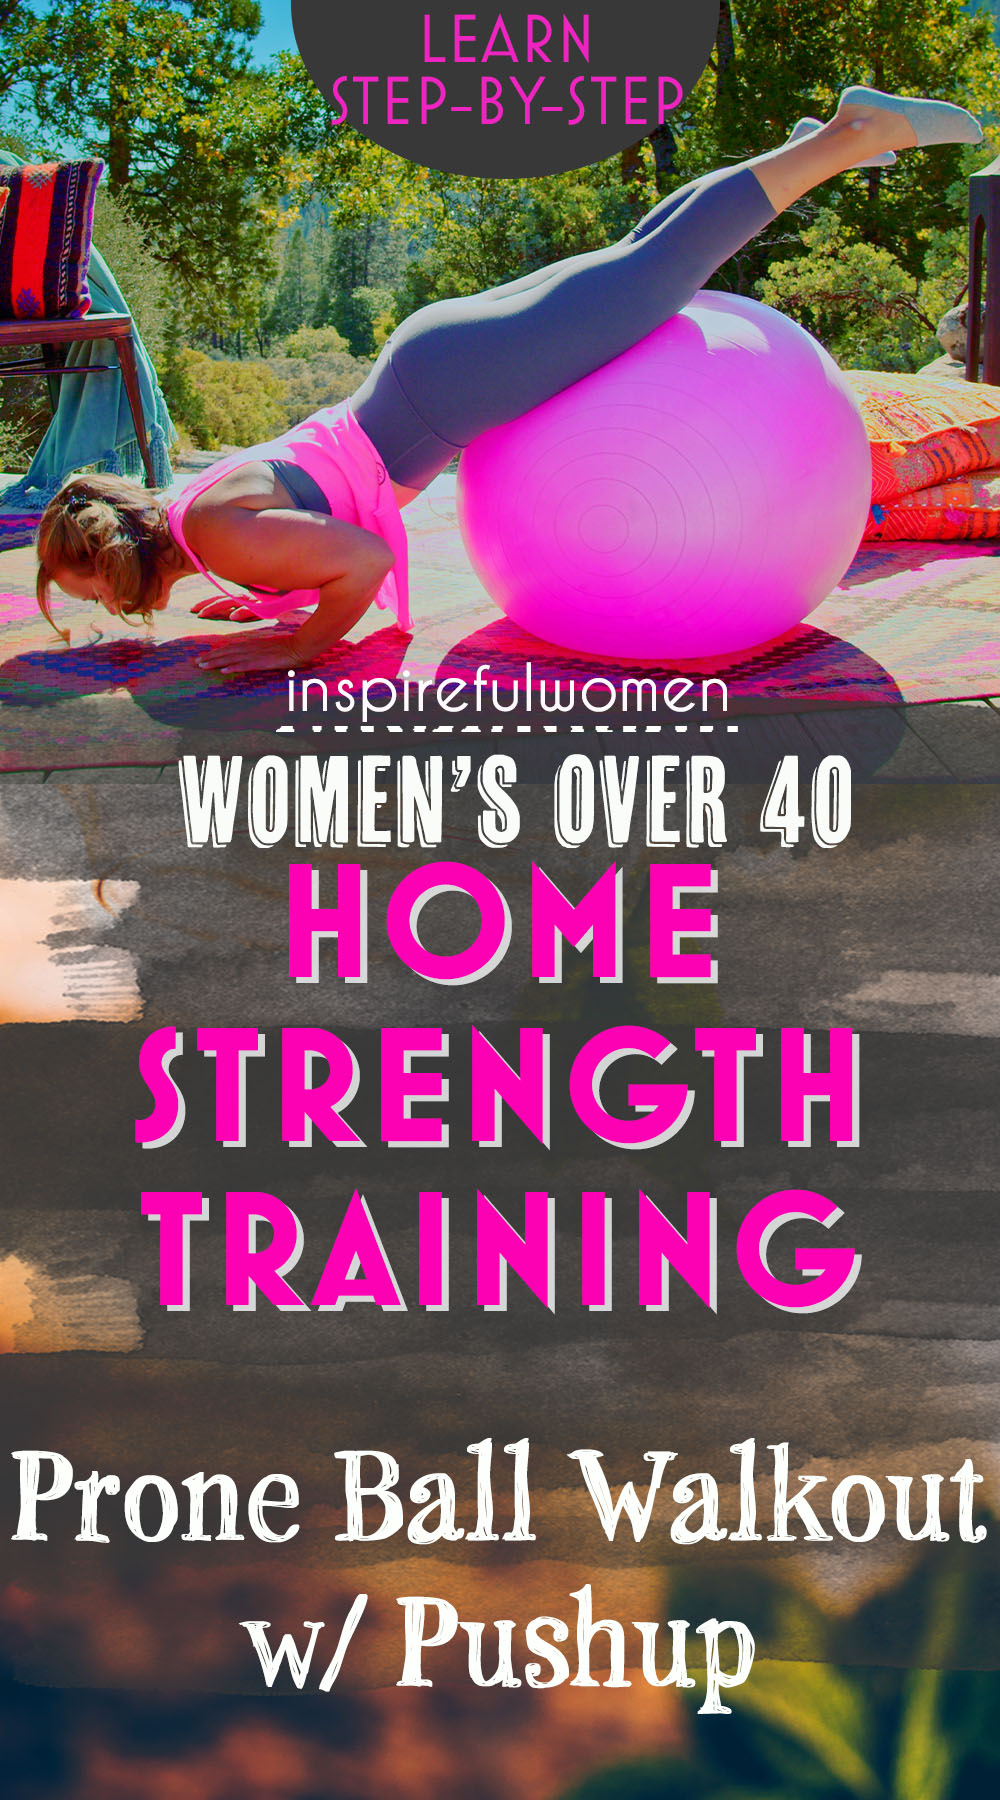 yoga-ball-walkouts-with-pushup-stomach-ab-core-toning-exercise-women-over-40